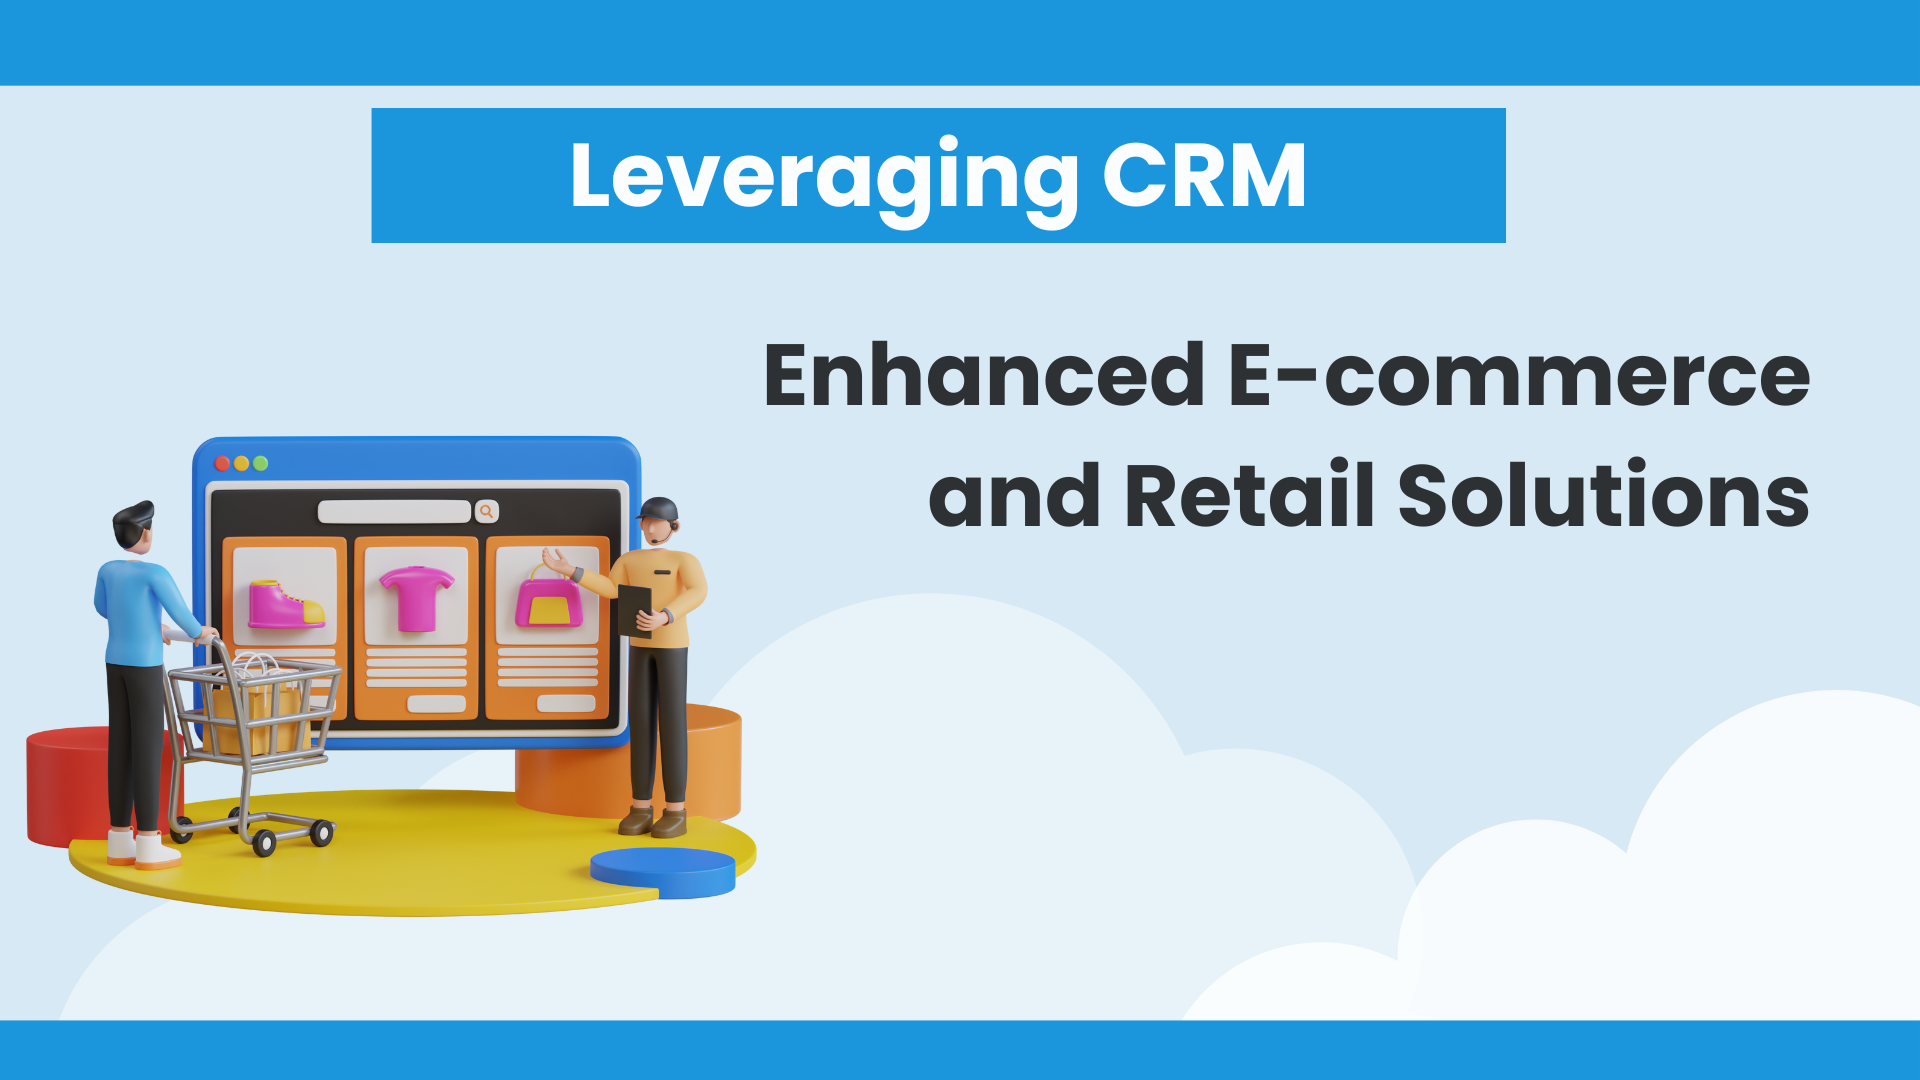 Leveraging CRM for Enhanced E-commerce and Retail Solutions